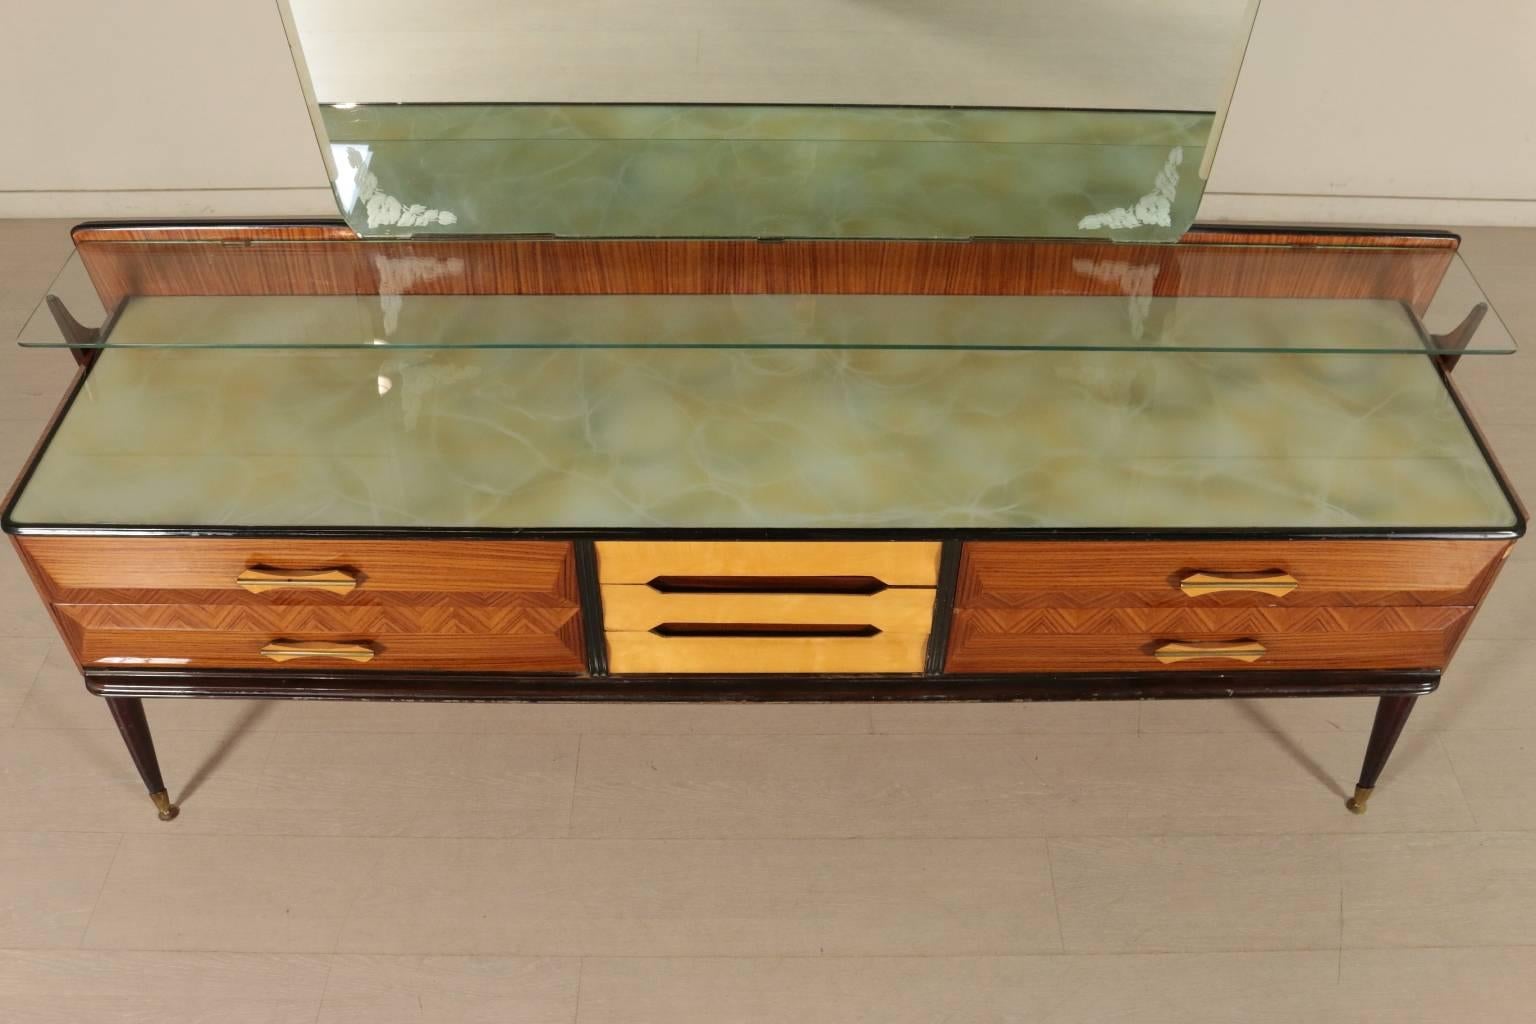 A chest of drawers with mirror, rosewood and ashwood veneer, back painted glass with marble effect. Manufactured in Italy, 1950s.